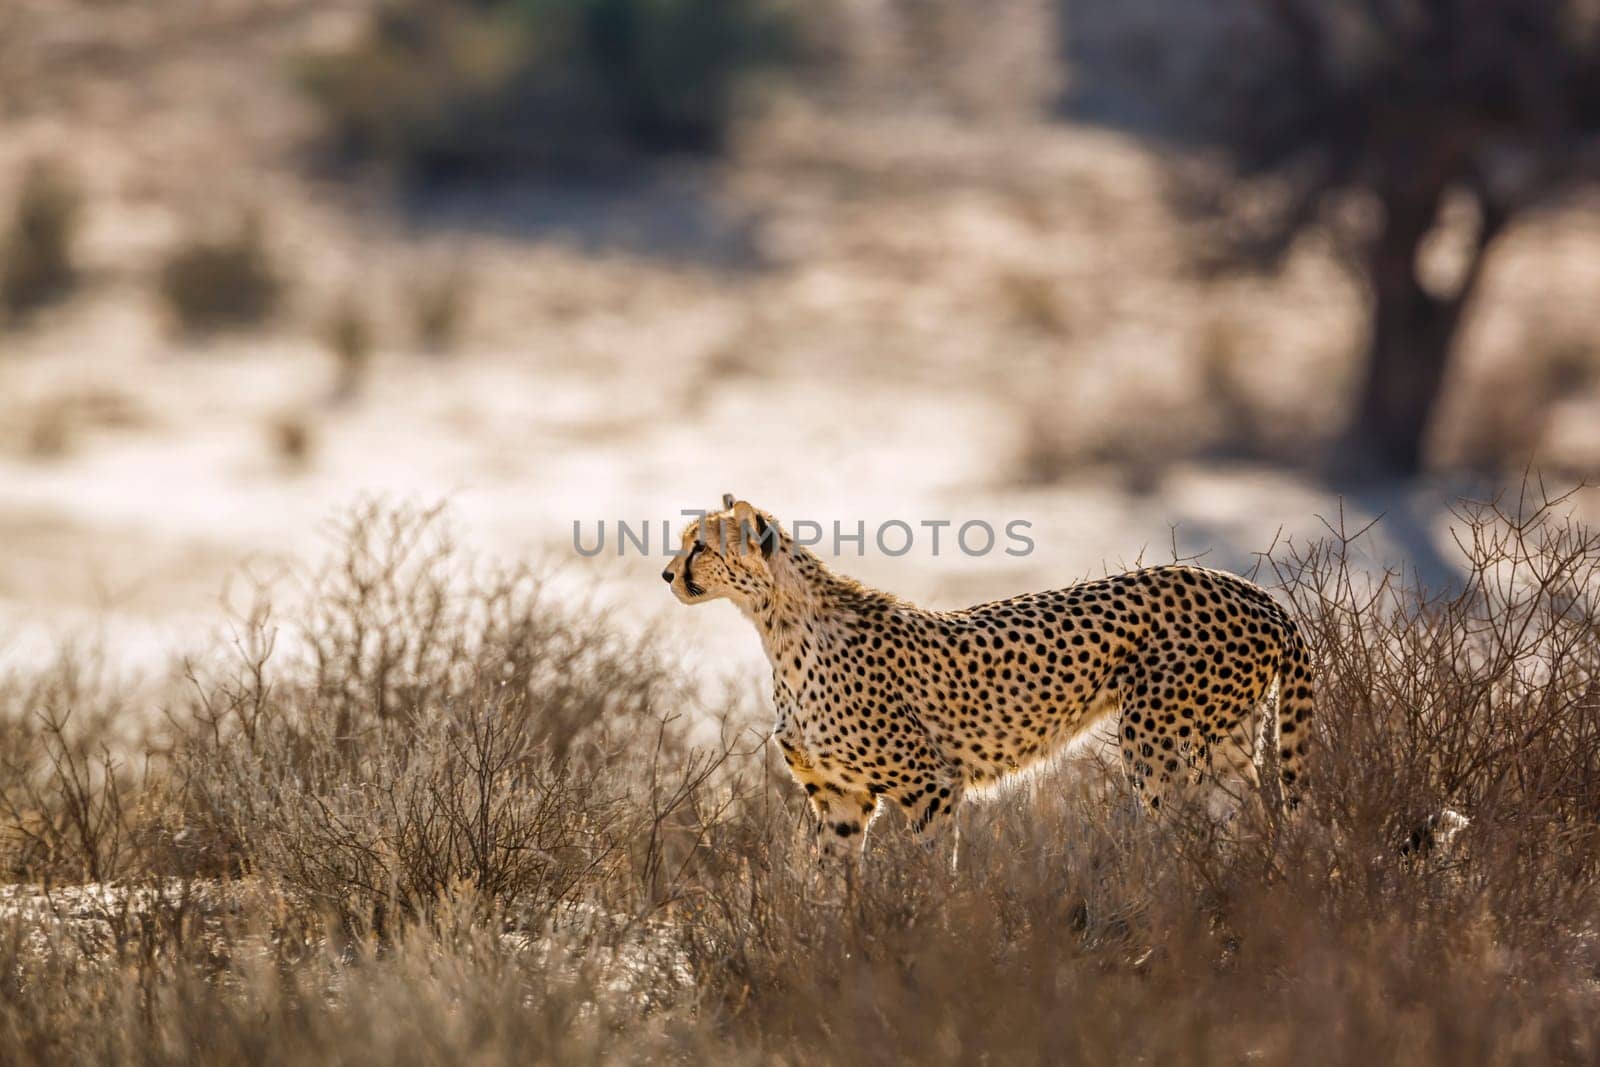 Cheetah in Kgalagadi transfrontier park, South Africa by PACOCOMO